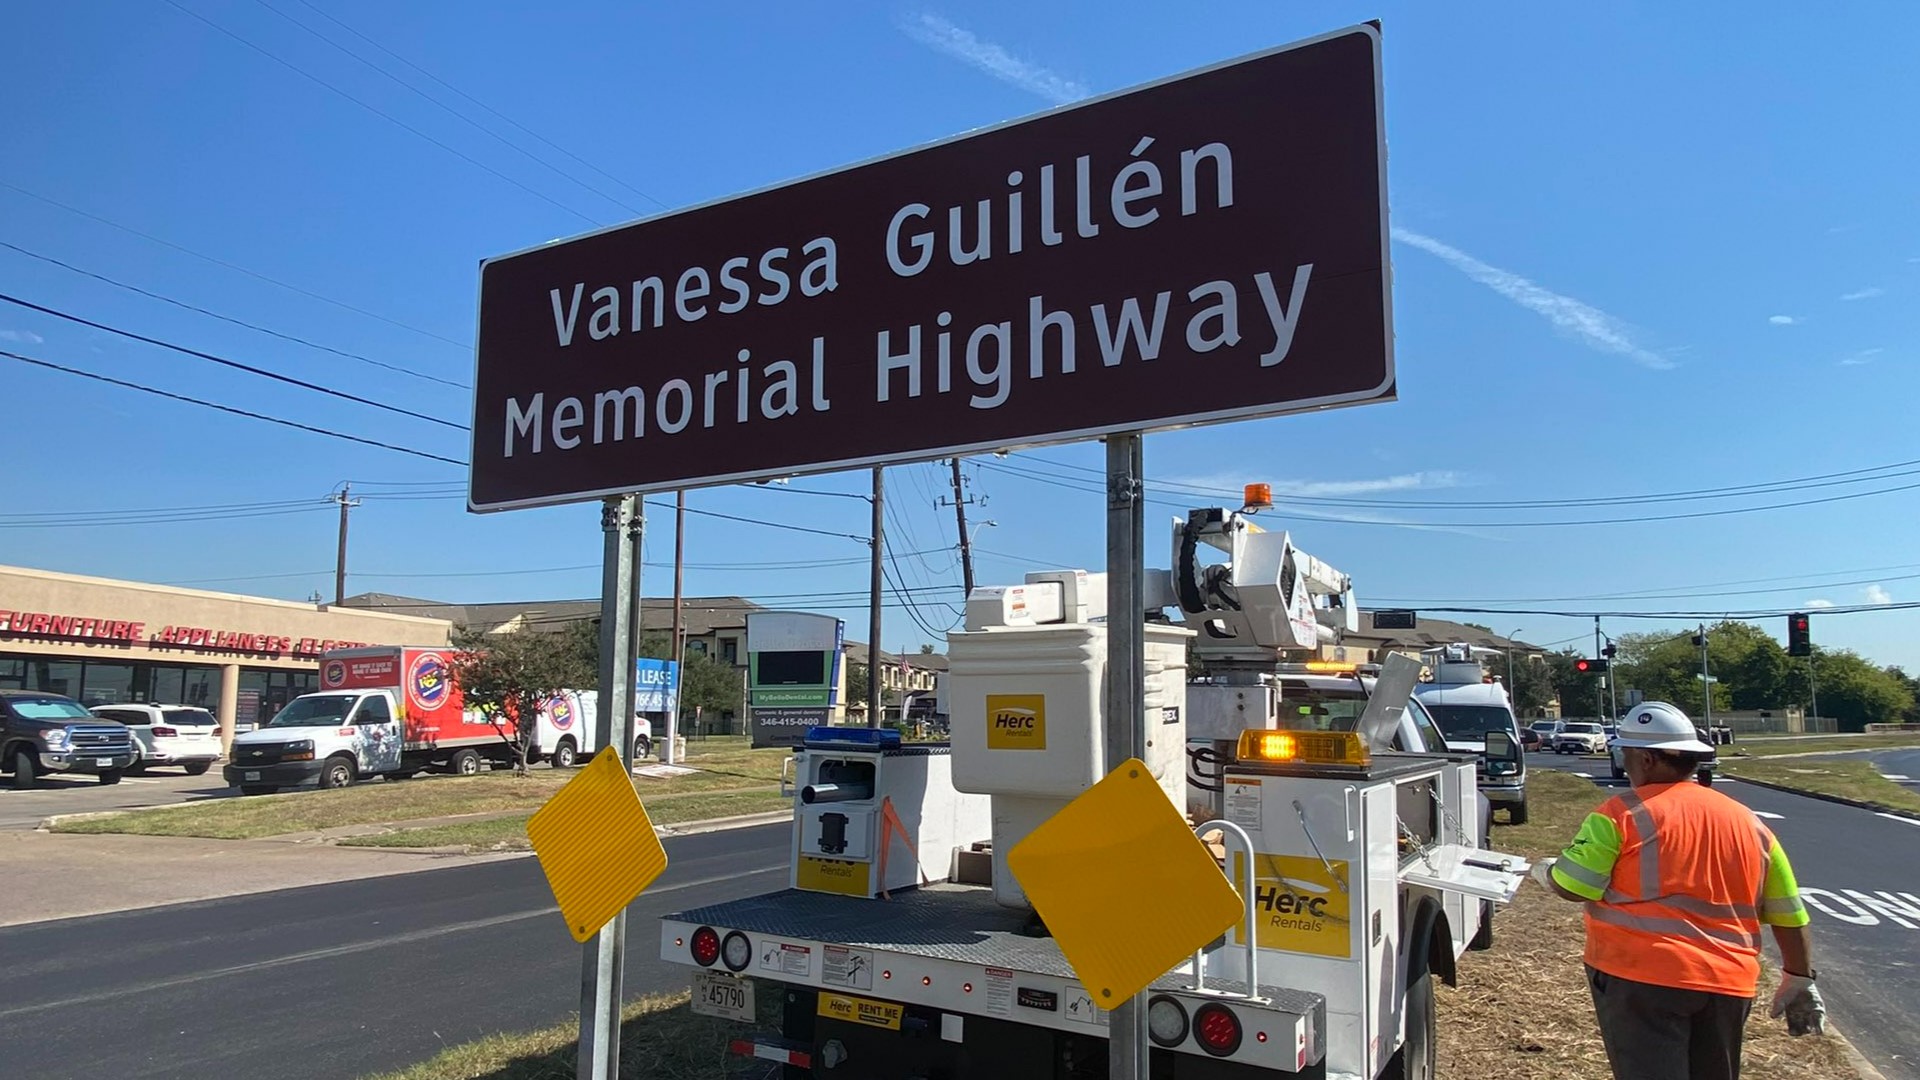 Vanessa Guillen Memorial Highway was officially unveiled Saturday morning in a ceremony with the family.